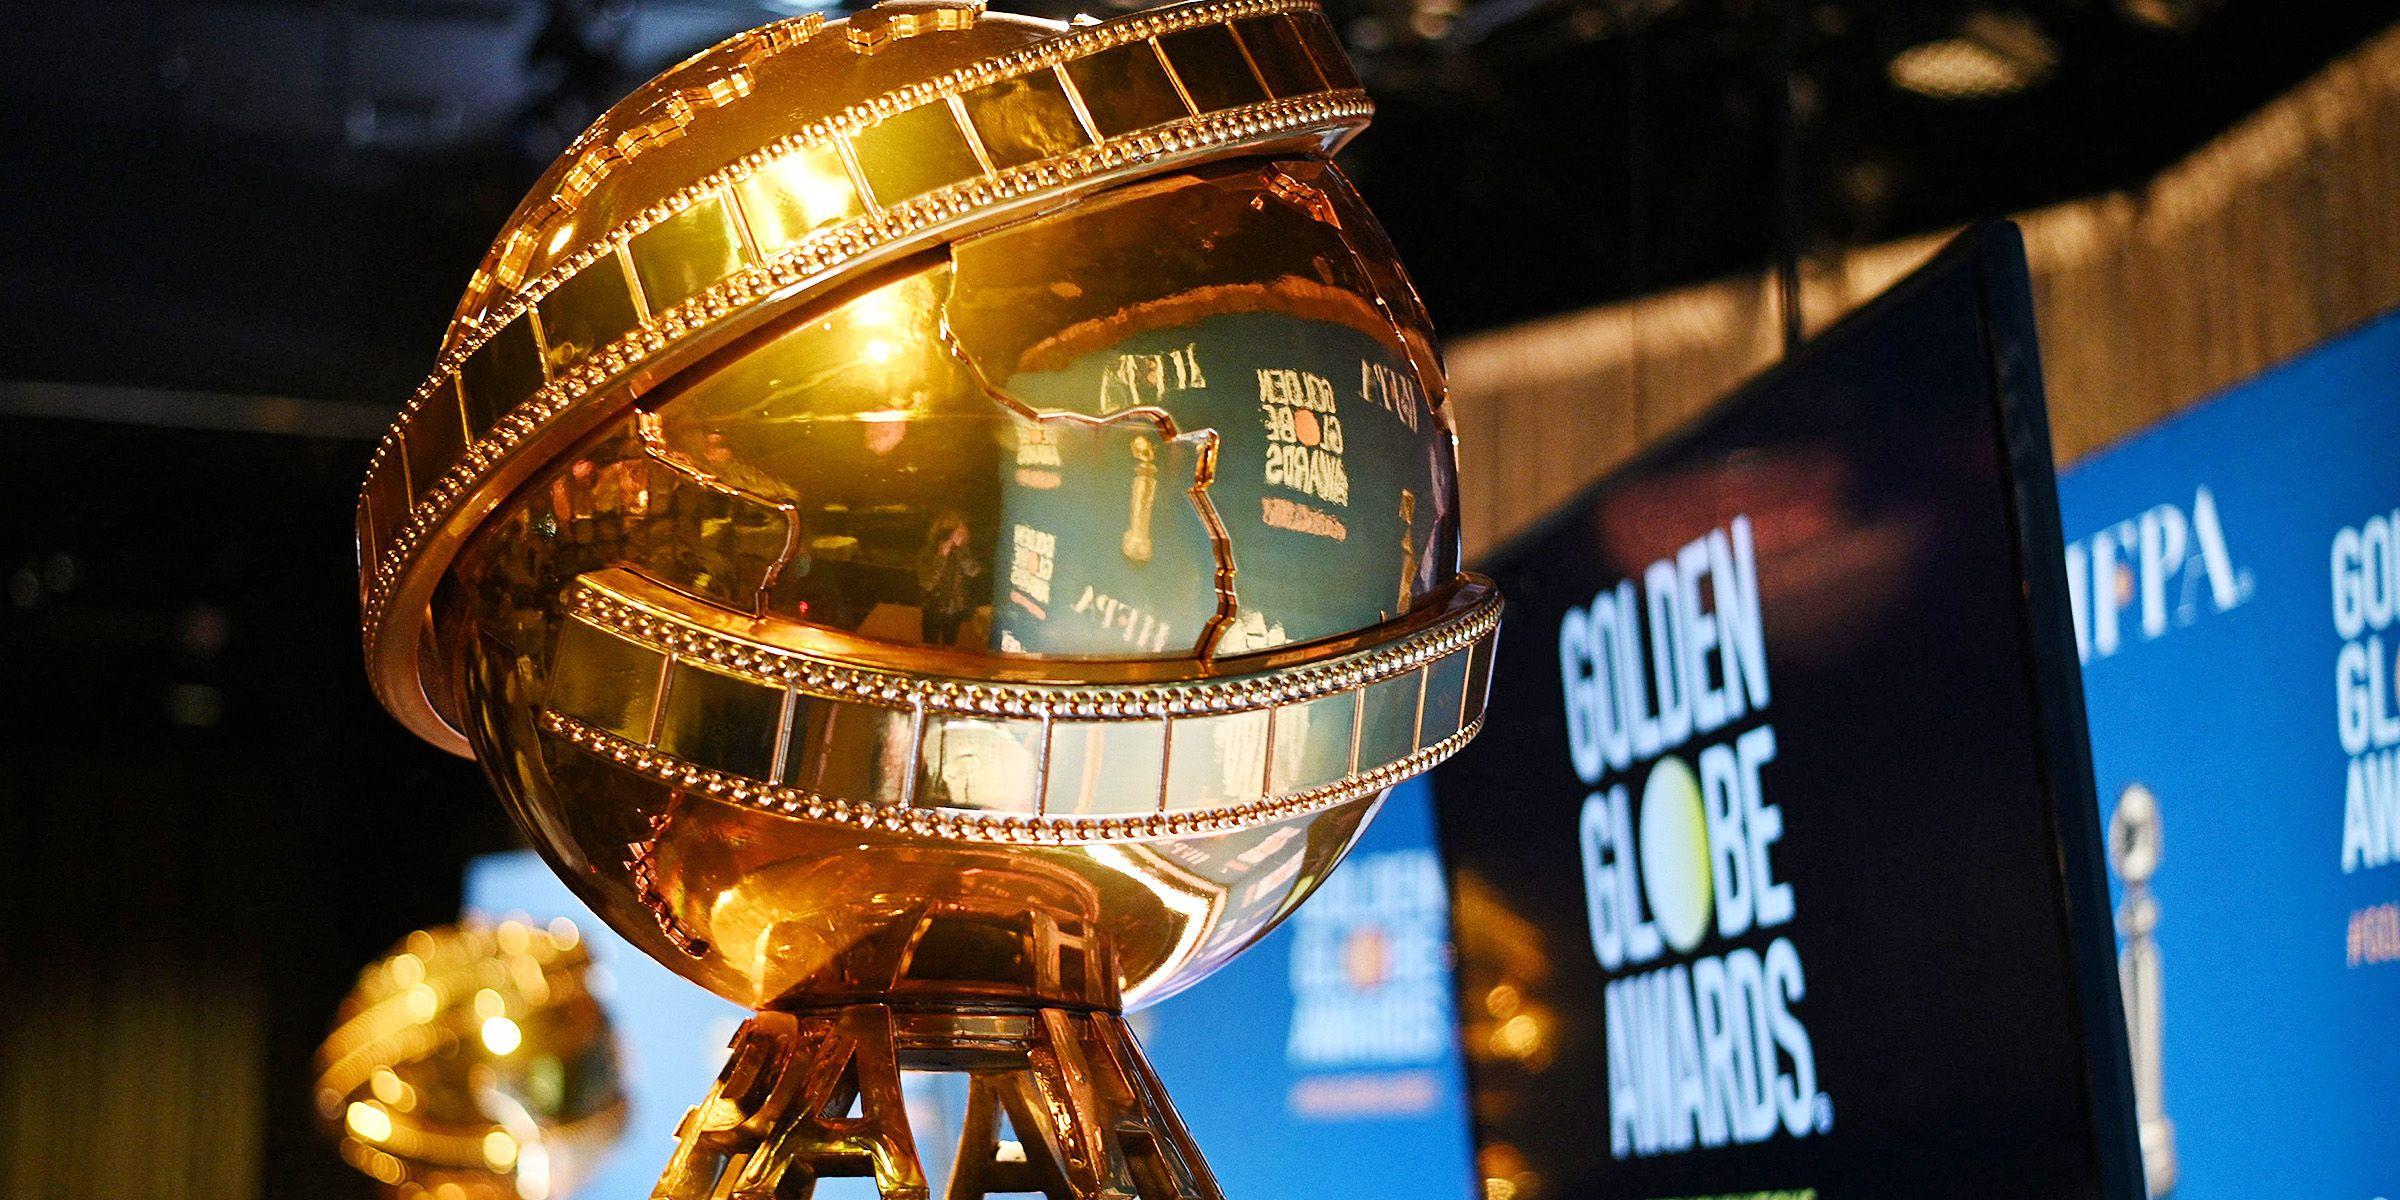 Watch the Golden Globes this January 10th at 5:00 pm PST on NBC and Peacock.